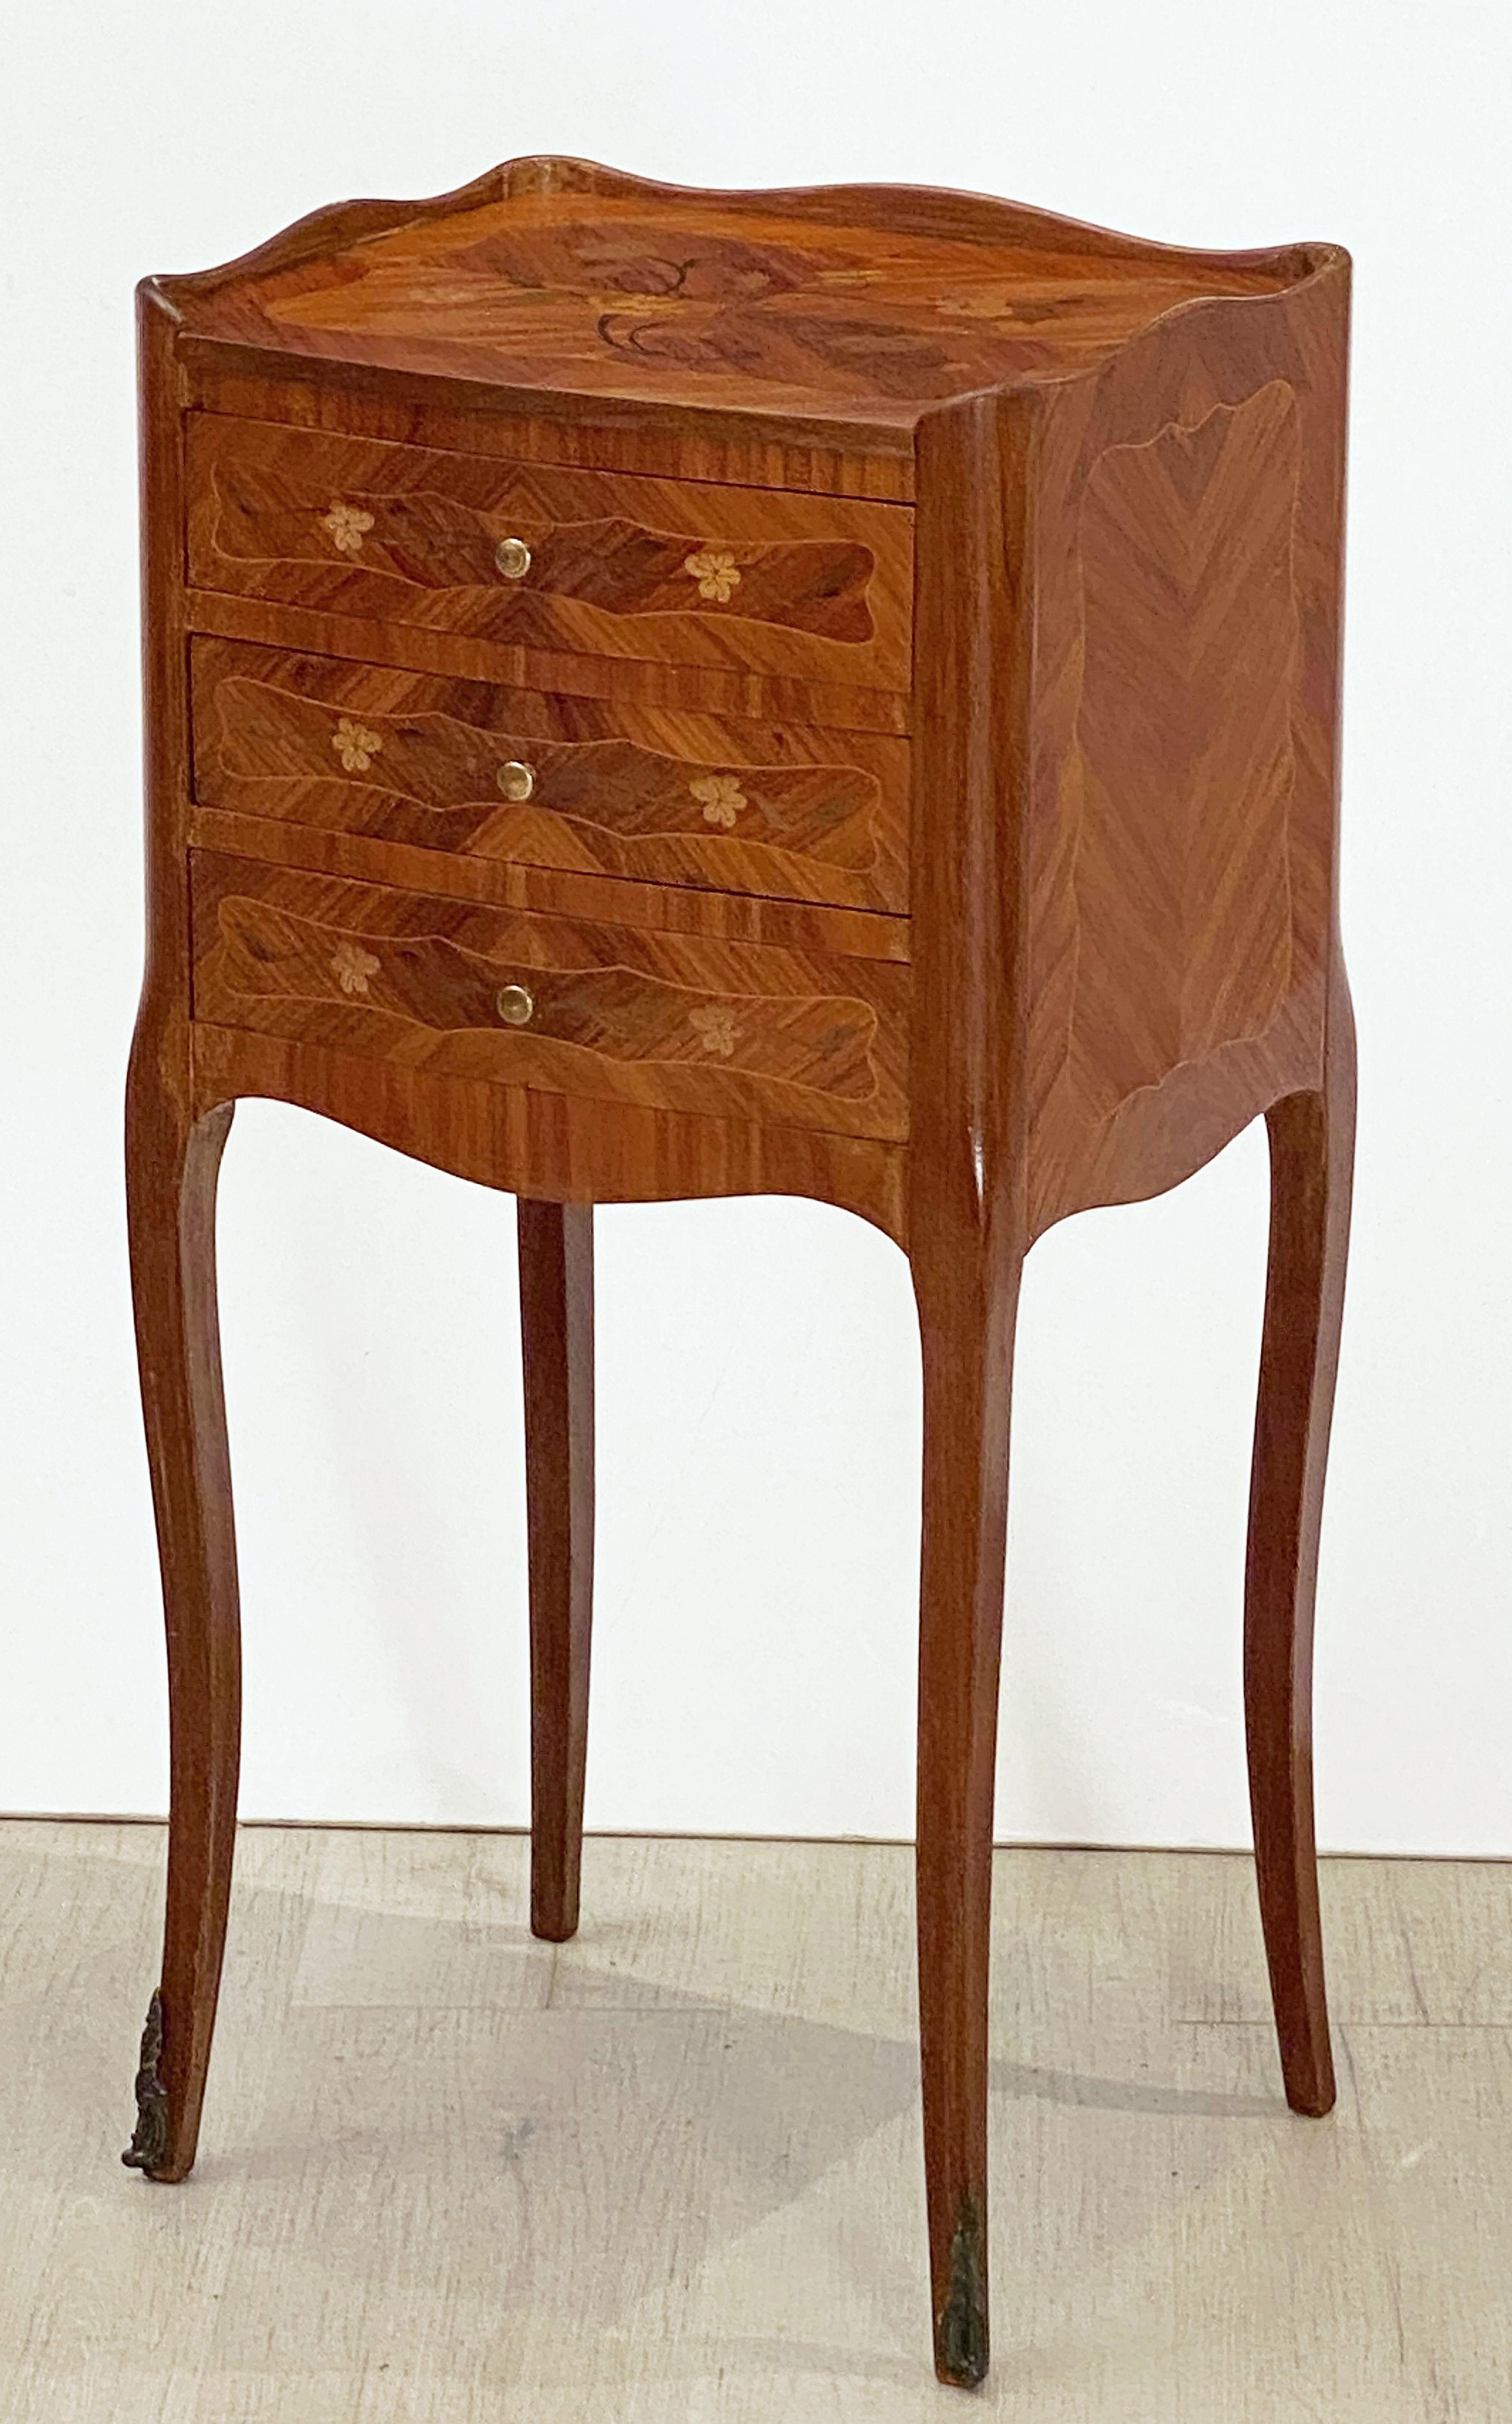 20th Century French Inlaid Nightstands or Bedside Tables 'Priced as a Pair'